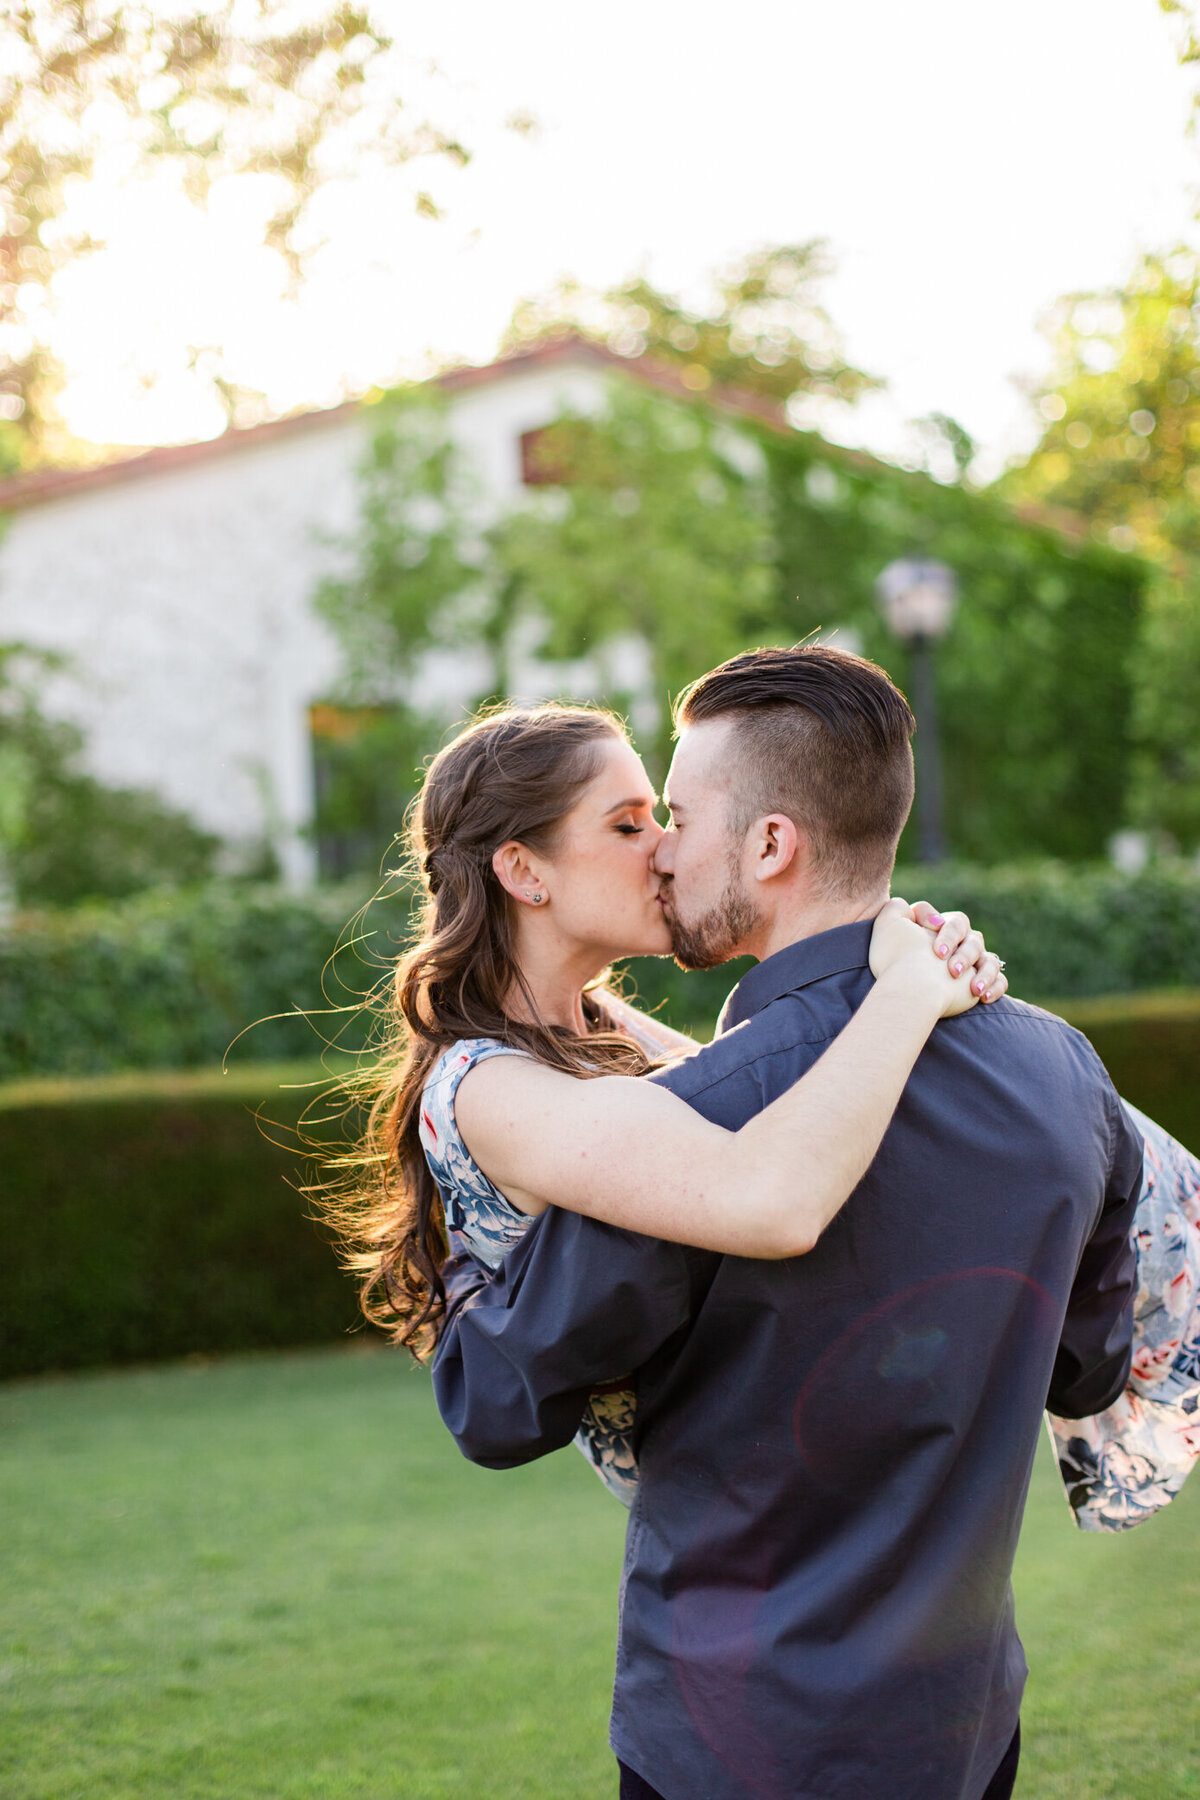 boy kisses girl and spins her in his arms, photo by Love is Magic Photo